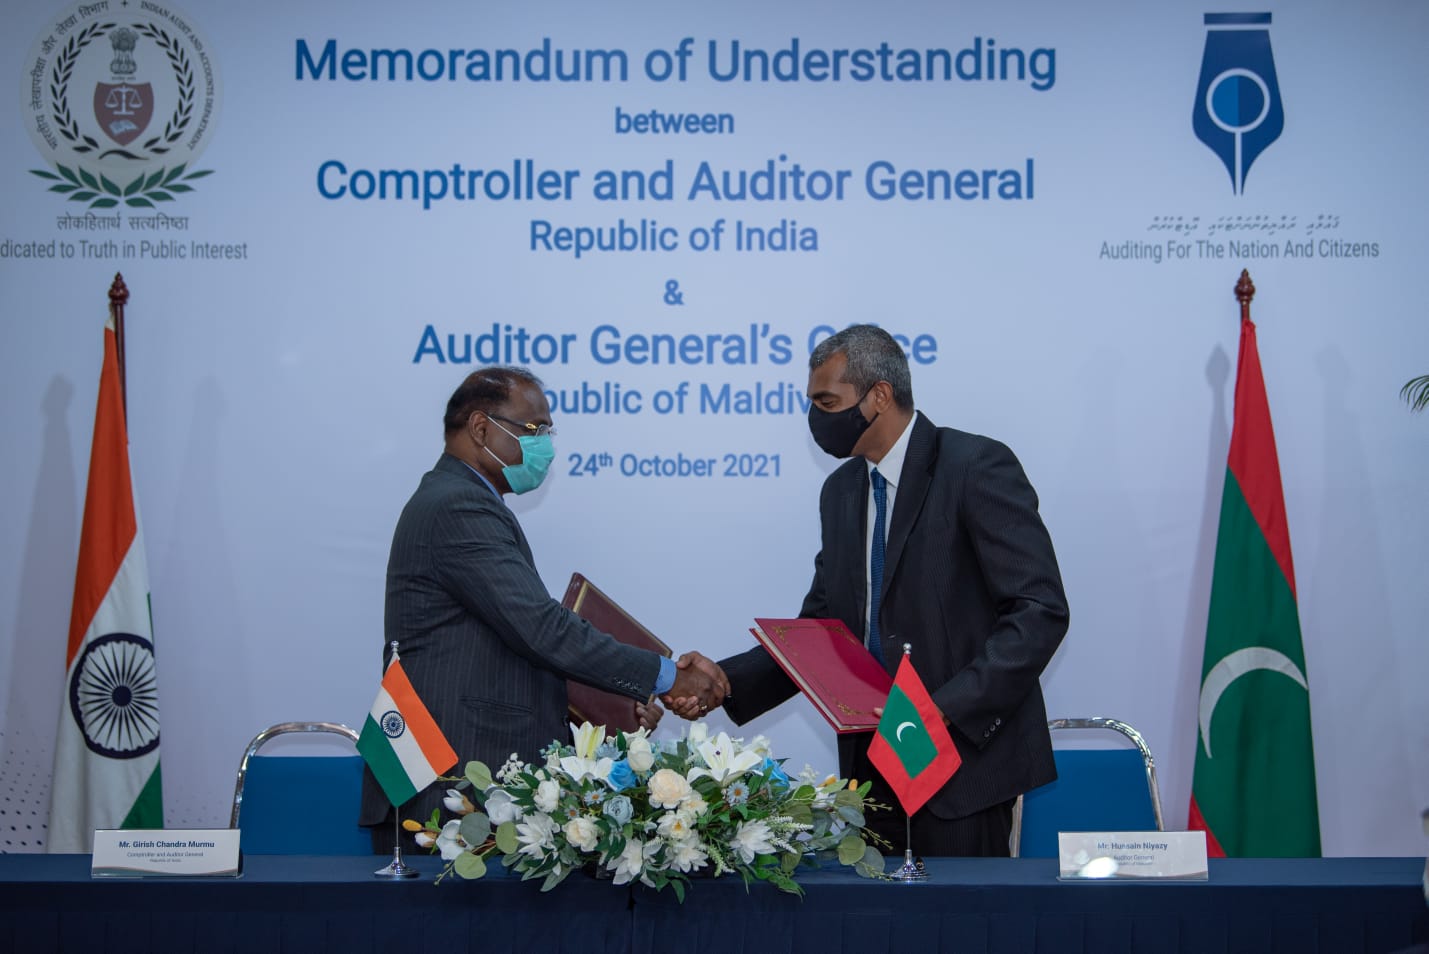 Signing Ceremony of MoU on 24th October 2021